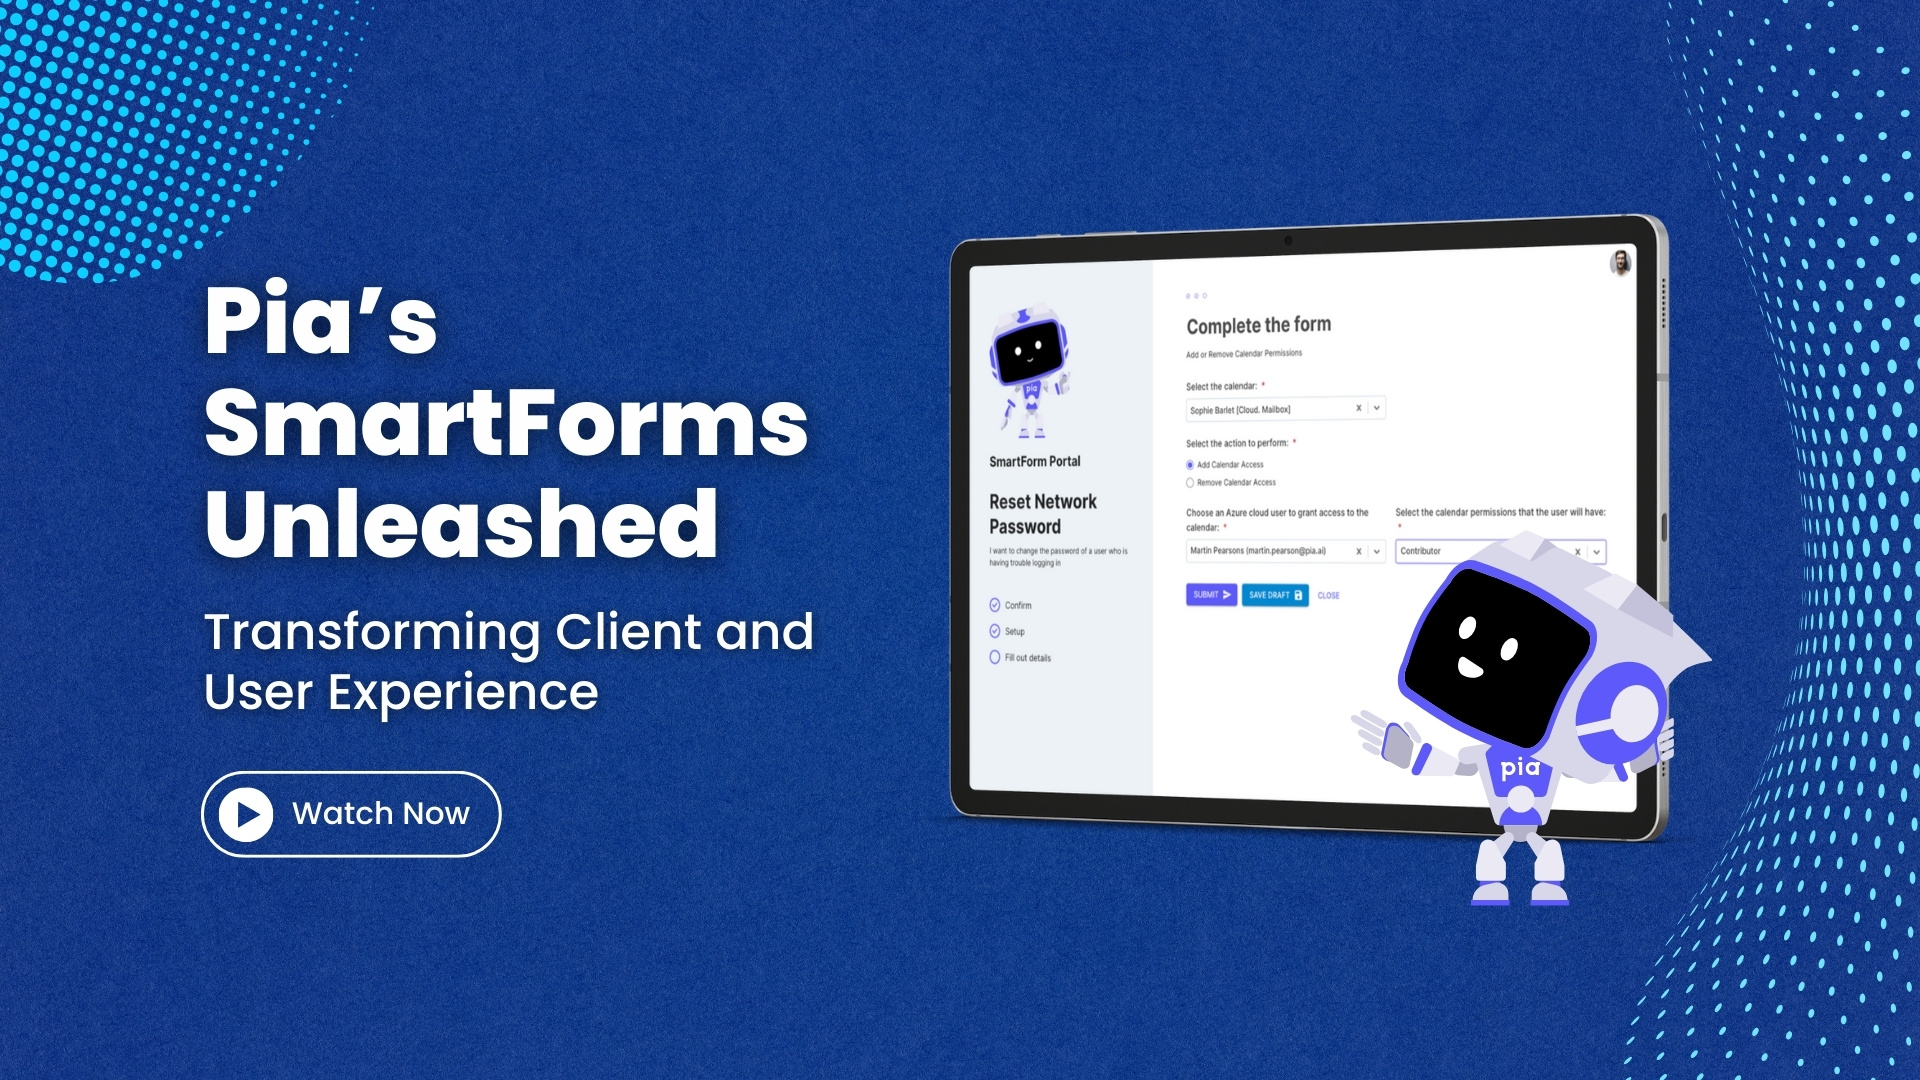 Pia's SmartForms Unleashed Transforming Client and User Experience